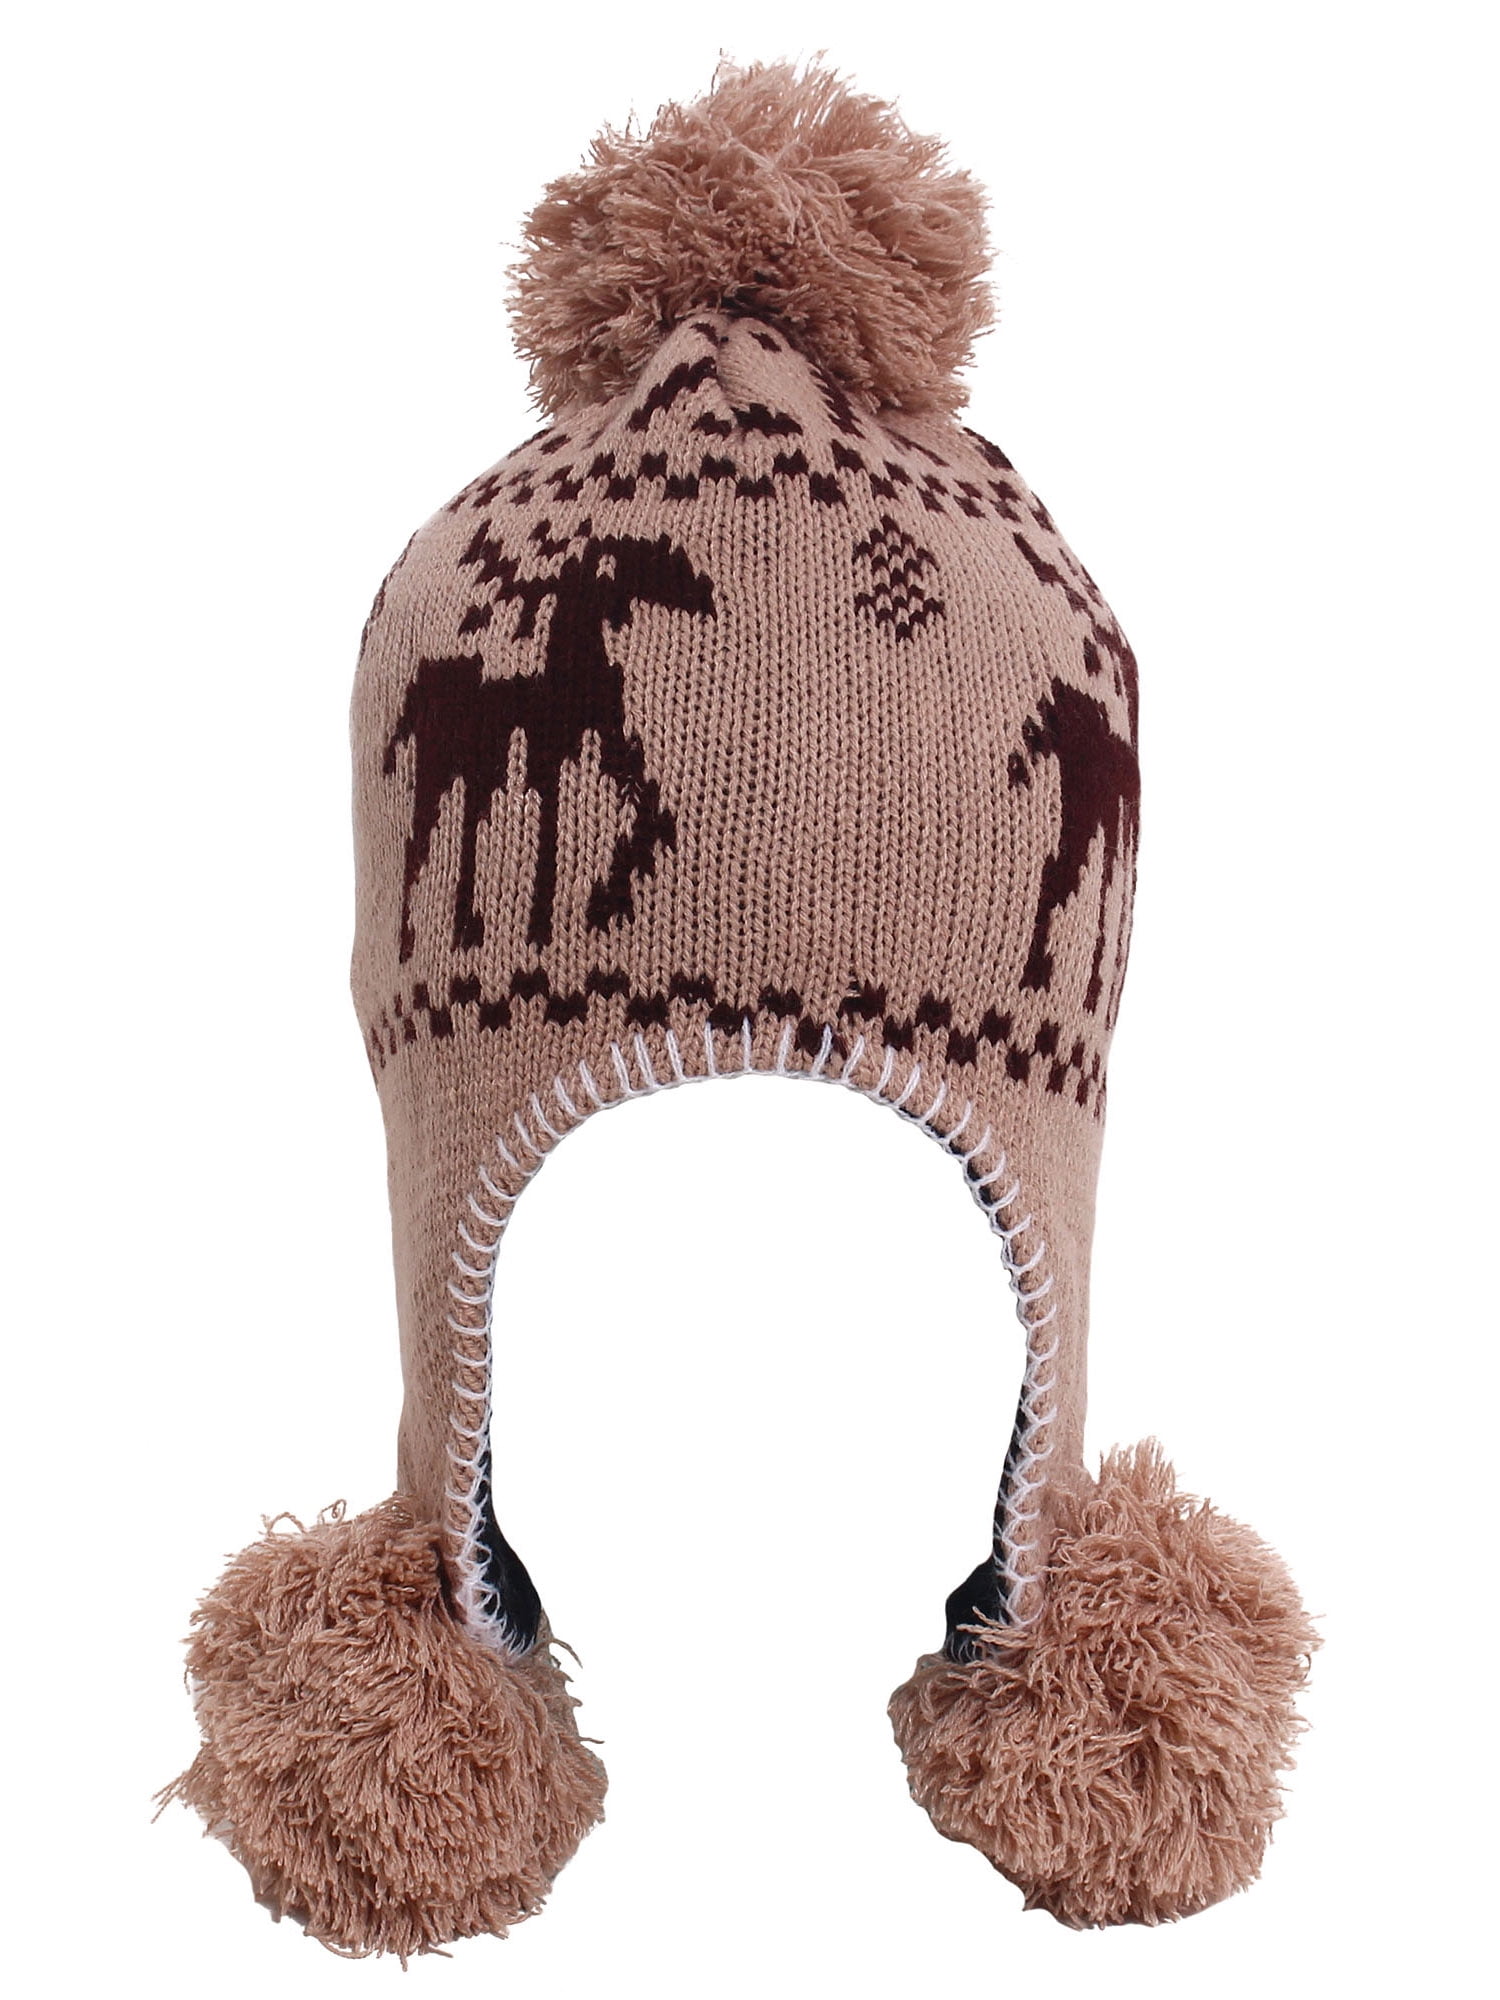 Details about  / WINTER KNIT HAT FLEECE LINED WITH EARFLAP UNISEX BROWN